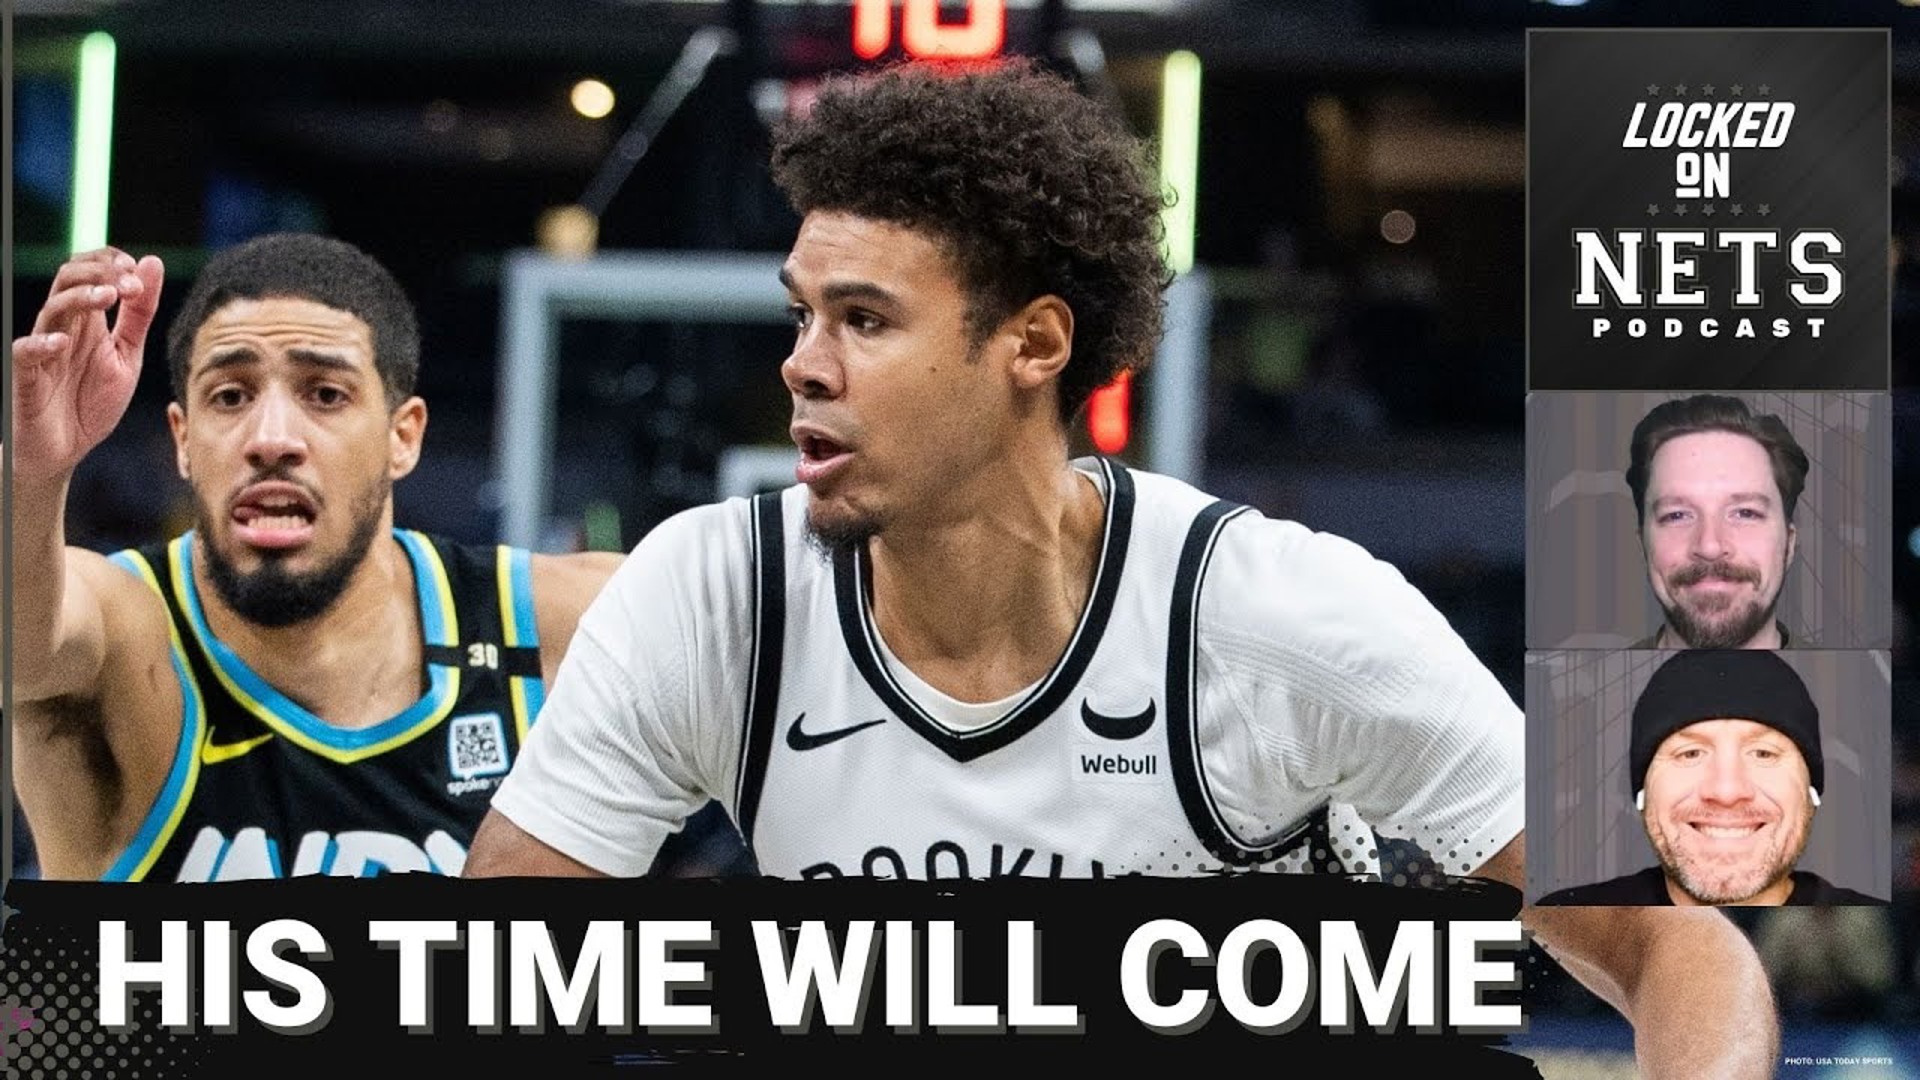 The NBA draft has come and gone with Cam Johnson and Dorian Finney-Smith still on the team. What is Sean Marks plan with these two veterans going forward?